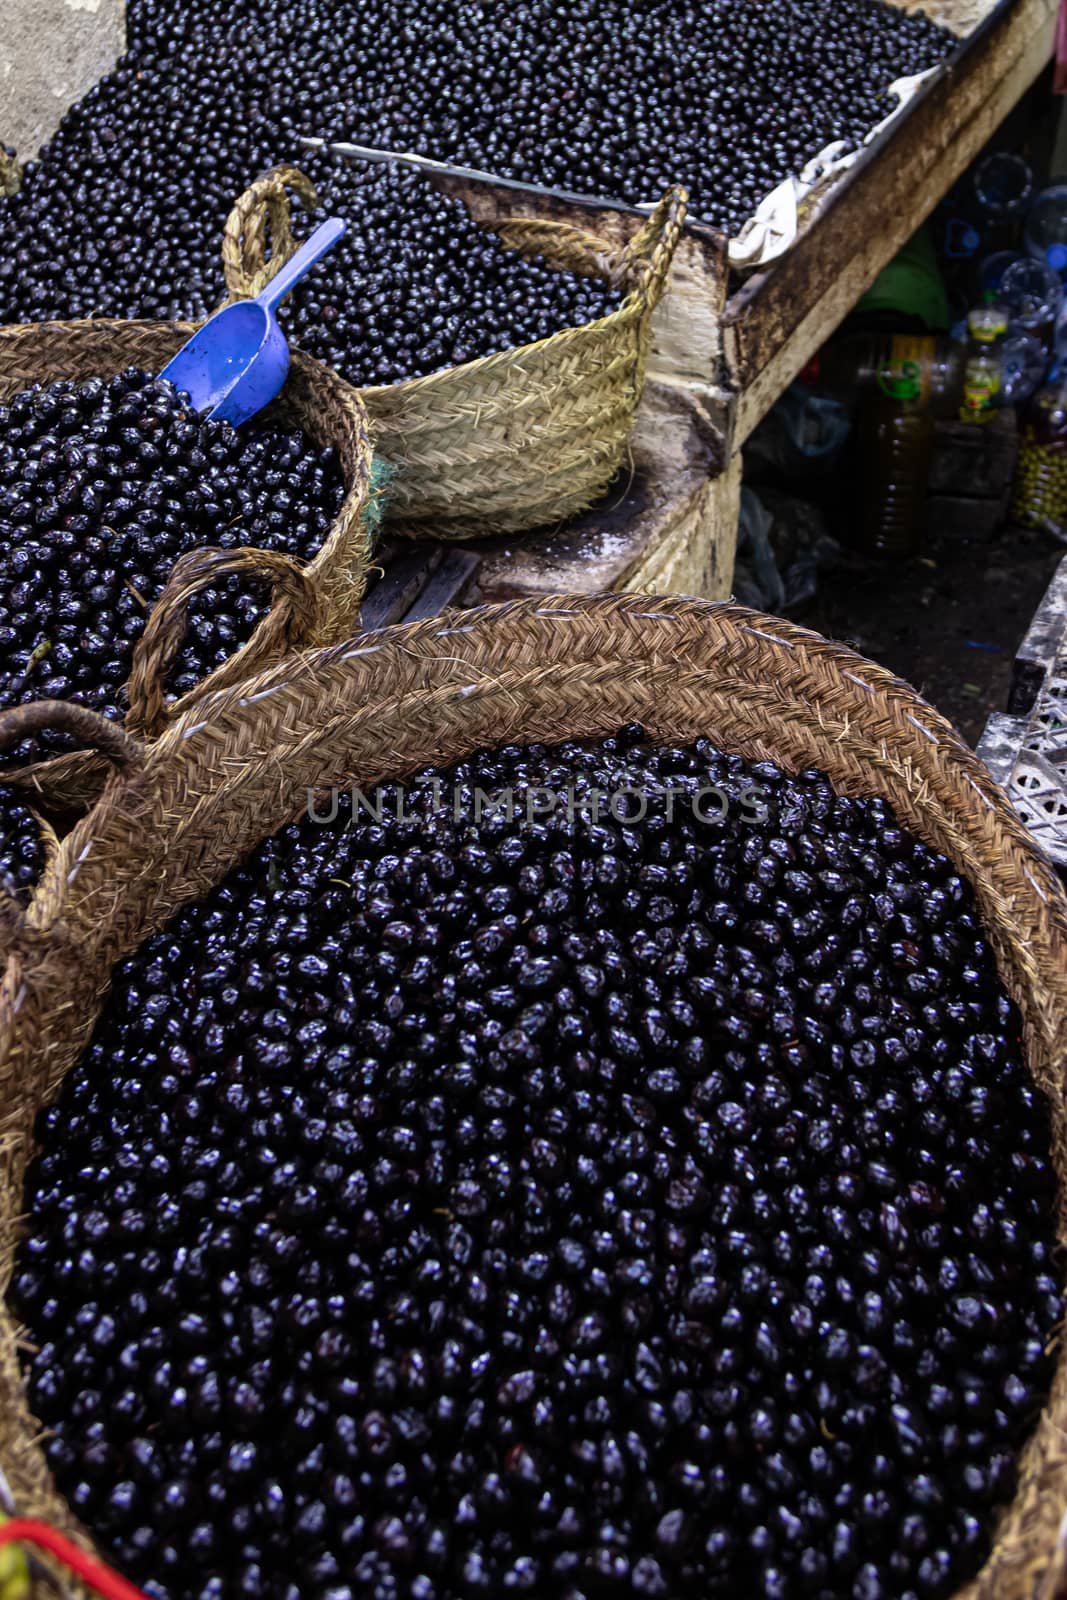 Marrakech, Morocco, 01/12/2020 market stall selling black olives by kgboxford